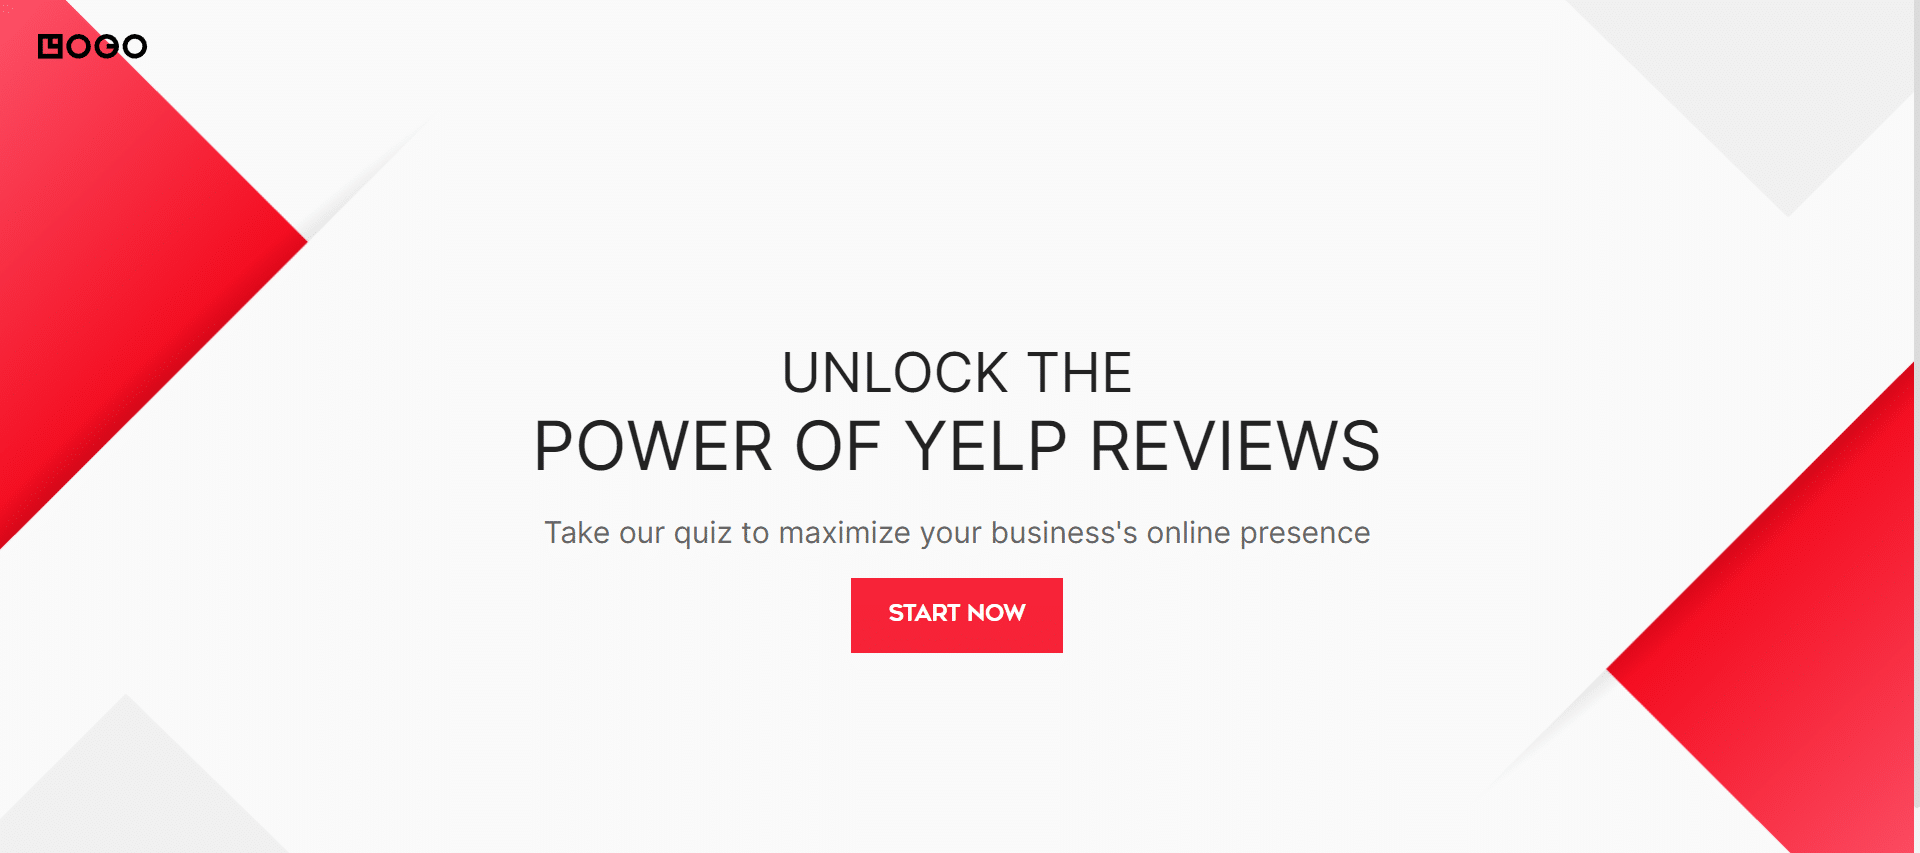 UNLOCK THE power of yelp reviews